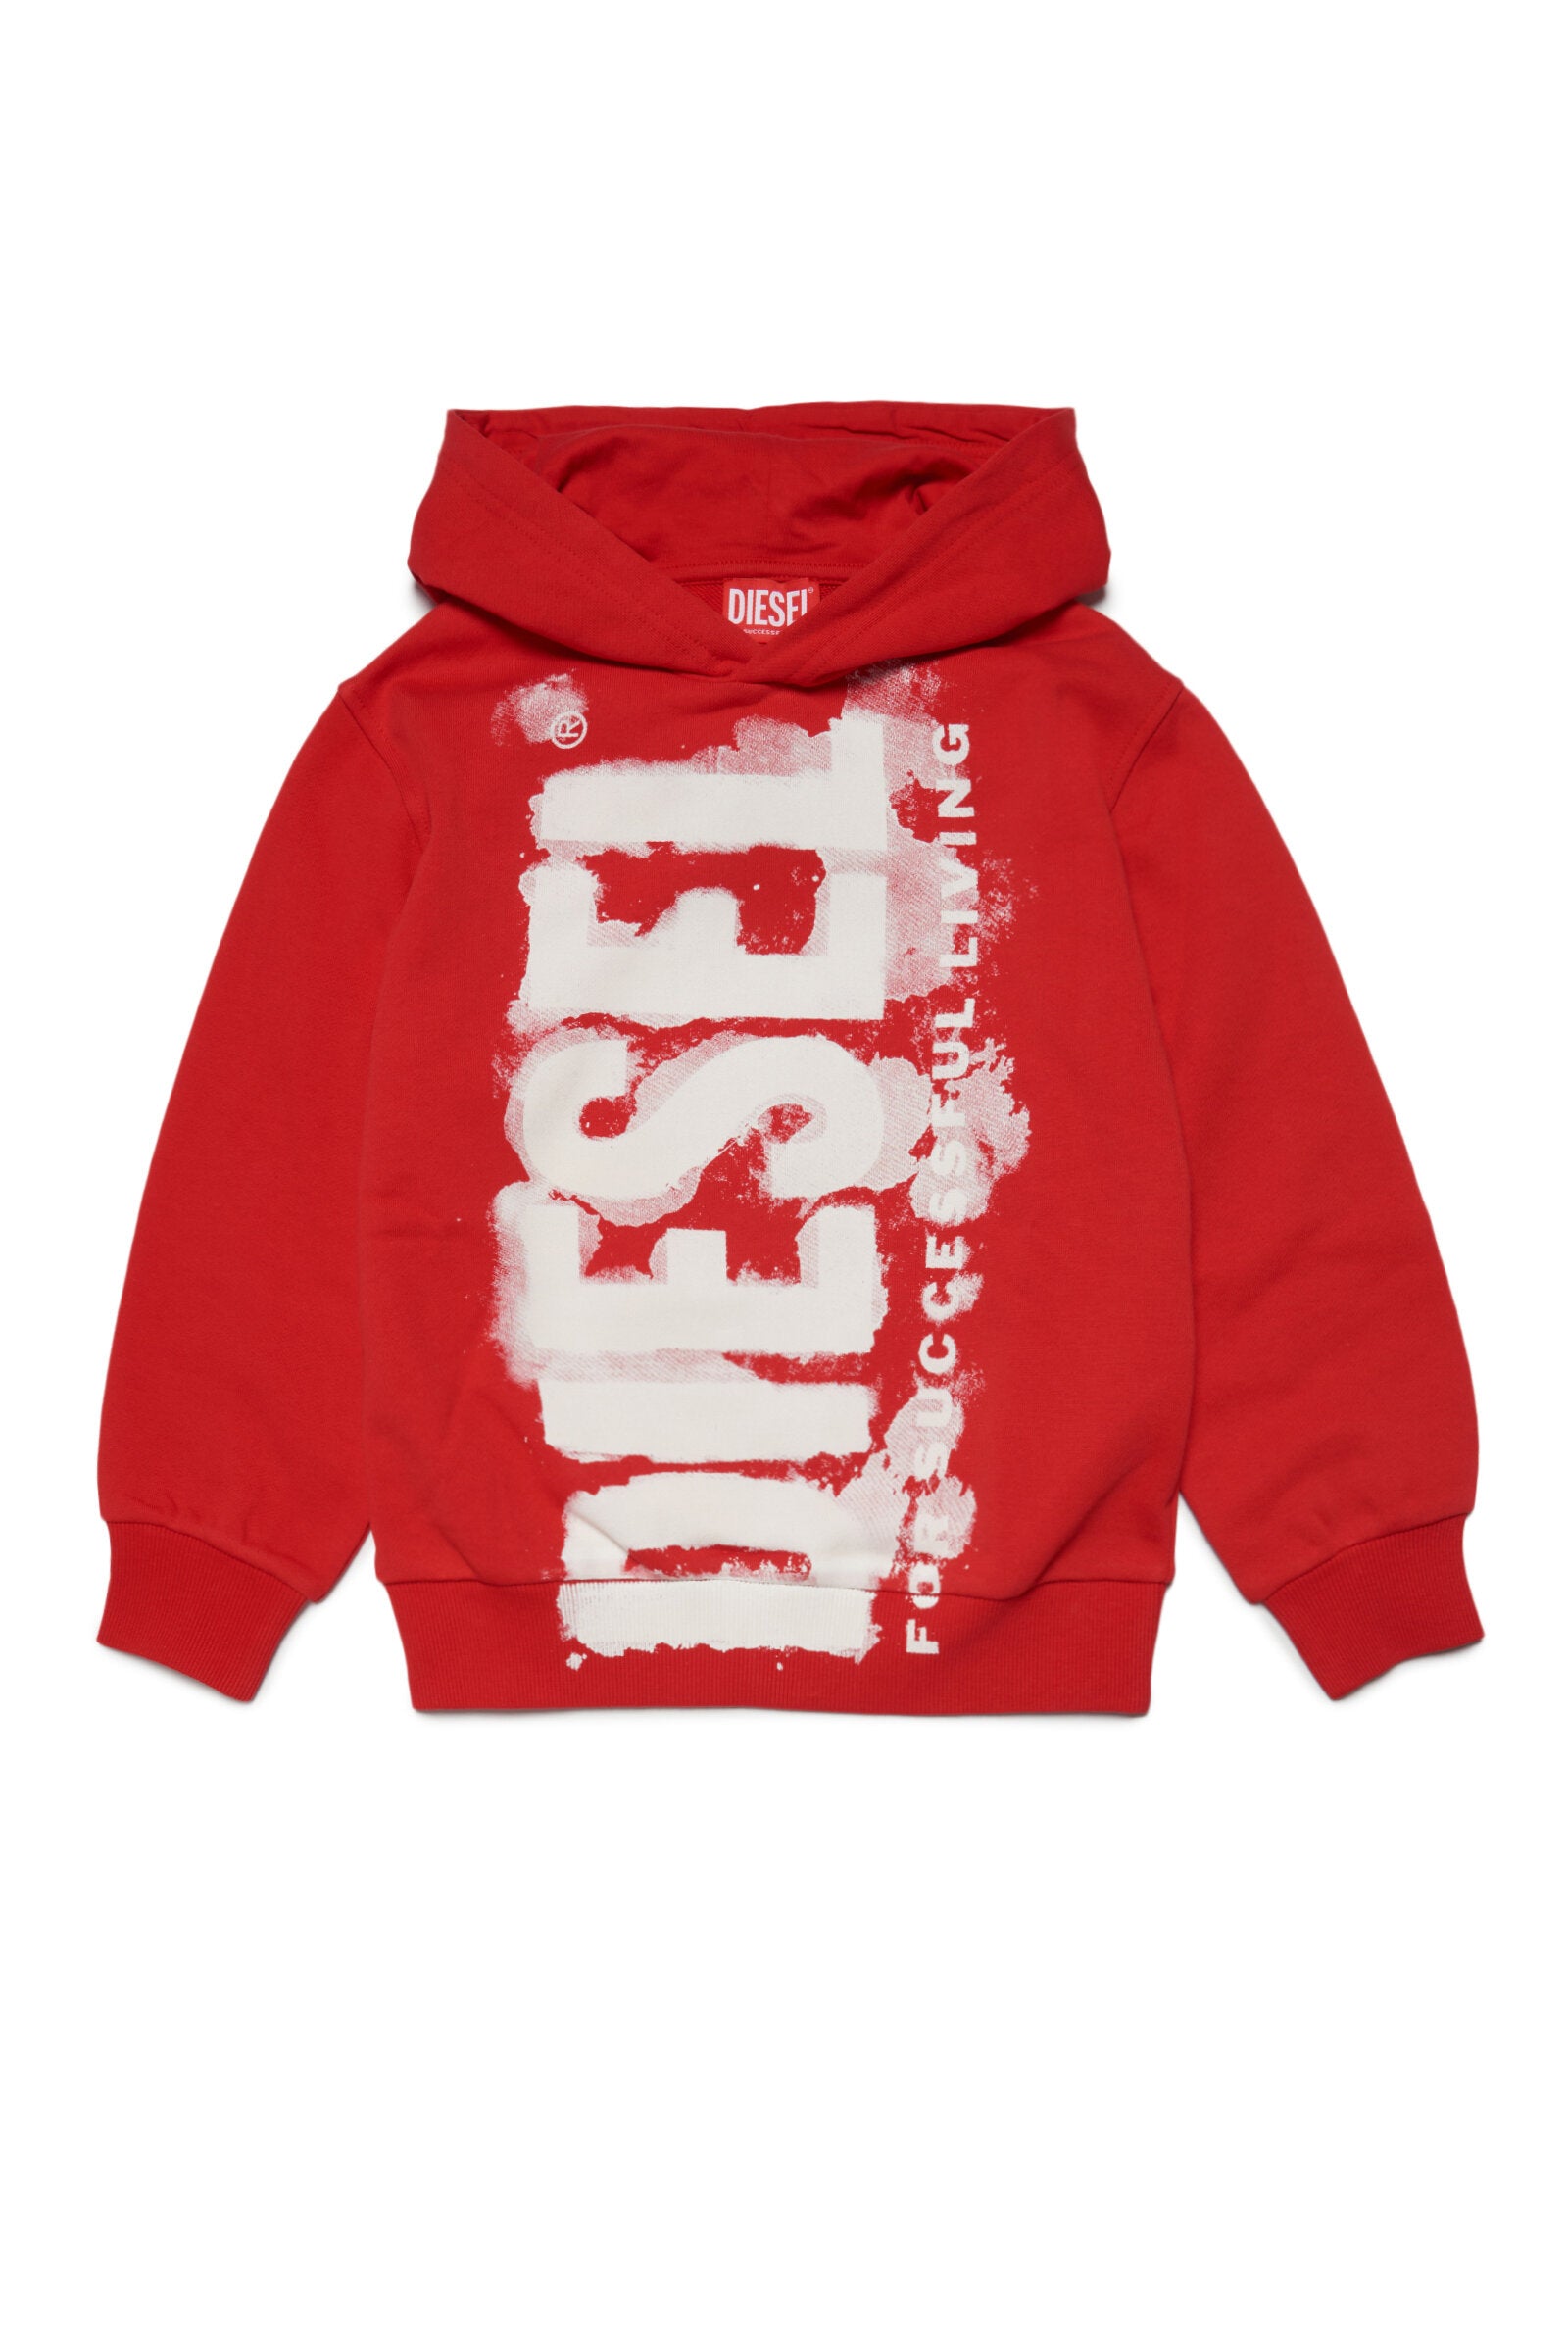 Diesel red Kid logo | with hooded sweatshirt watercolour for children Brave effect